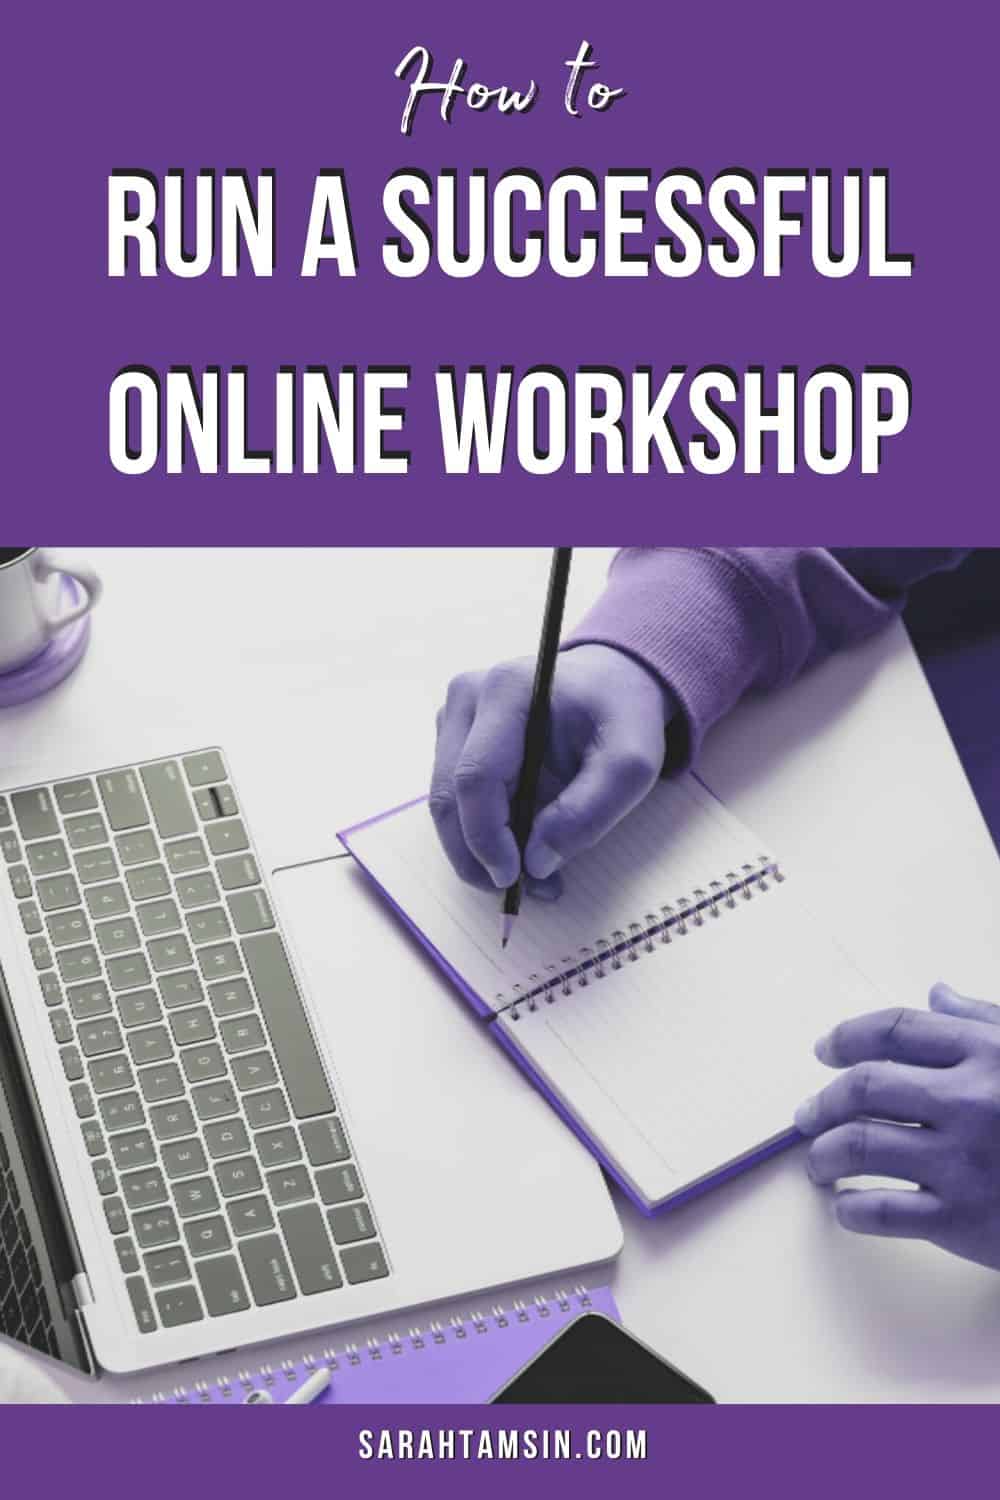 How to run a successful online workshop - webinar tips for trainers and presenters